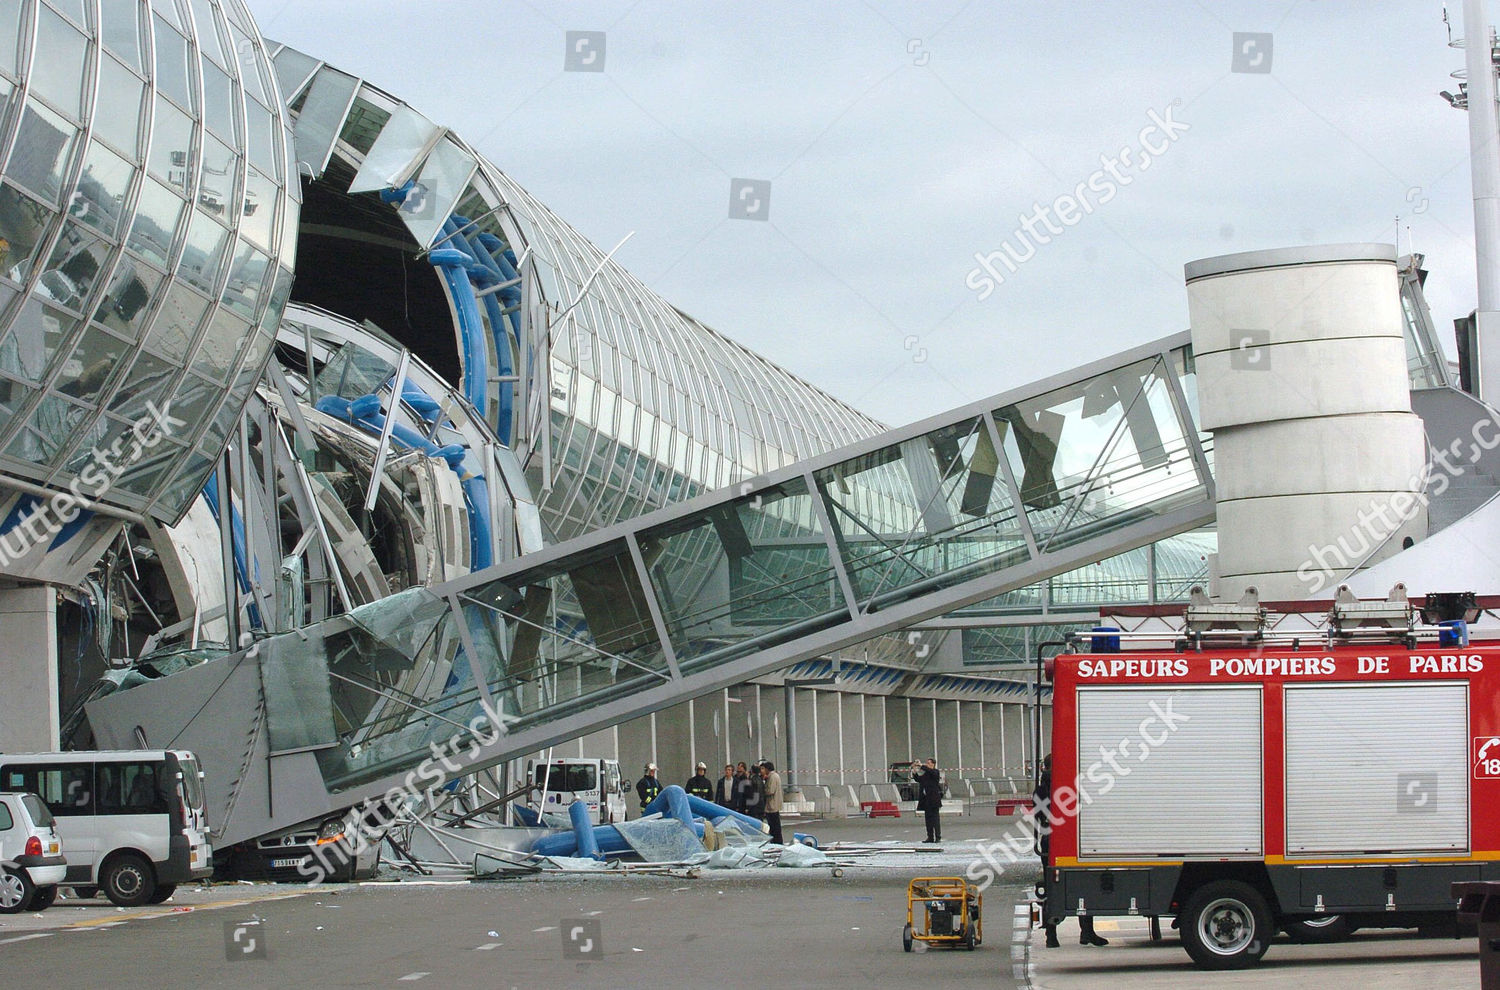 About the Charles-de-Gaulle Airport Terminal Collapse